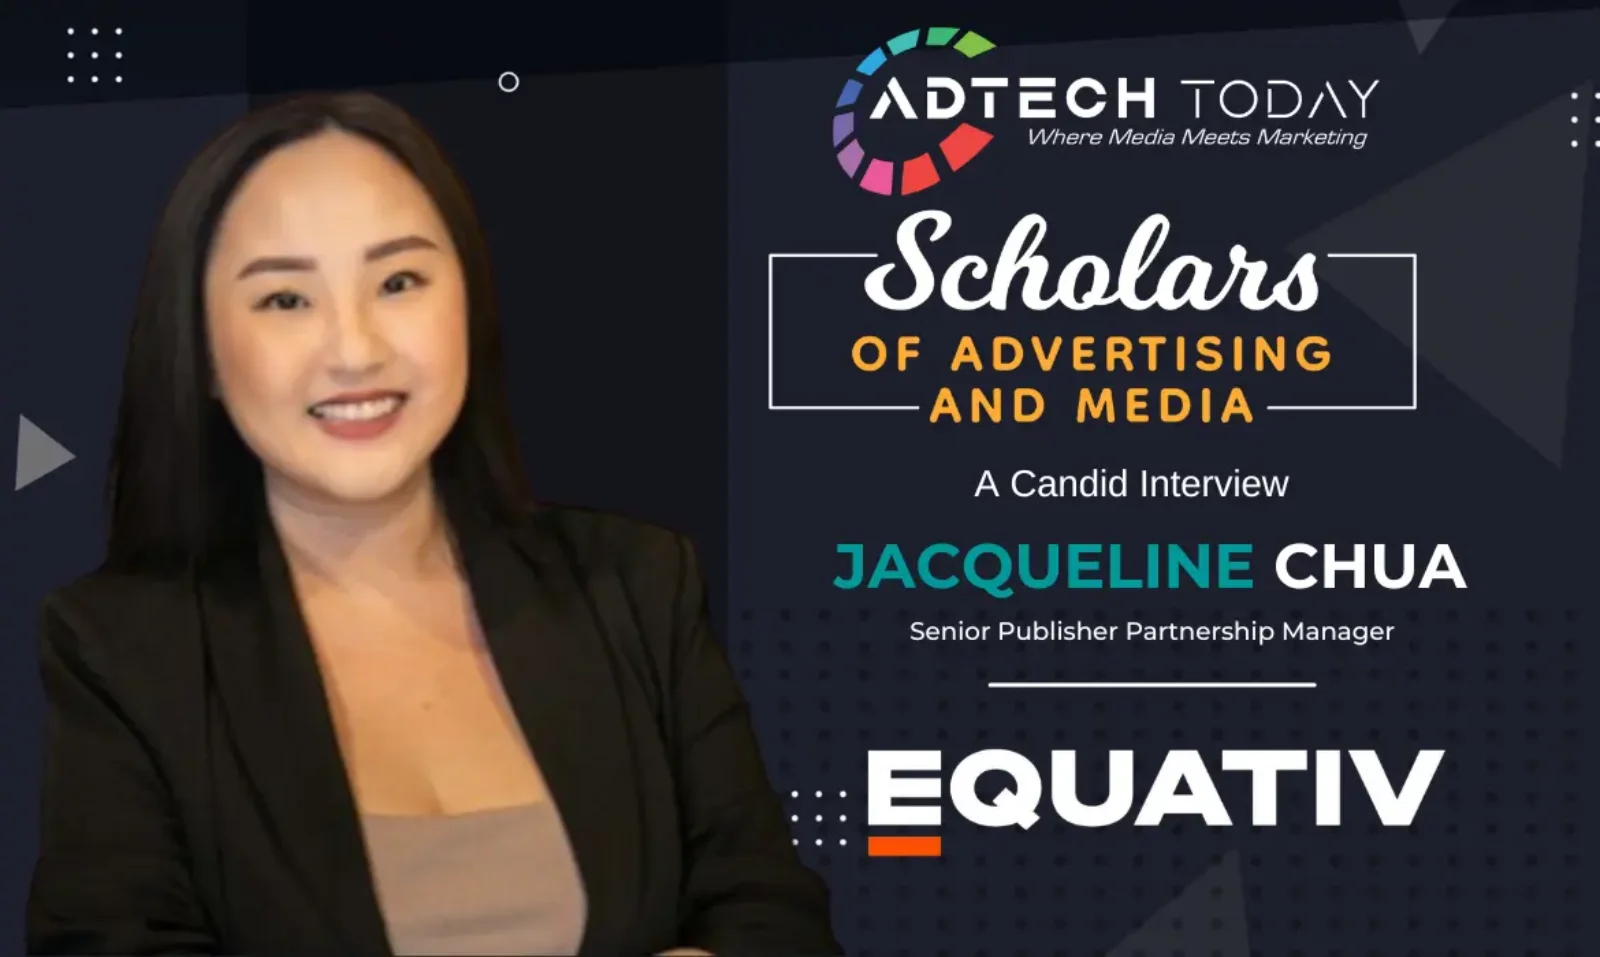 Jacqueline Chua, senior publisher partnership manager, publisher partnership, ad tech, adtech industry, ad tech industry, Xaxis, Teads, programmatic, programmatic advertising, technology, publisher growth, strategic approach, digital advertising, innovation, conversation, professional, publisher needs, performance optimization, Equativ, Equativ APAC, revenue, business strategy, operational knowledge, technical knowledge, advertisers, Sharethrough, French tech, advertising, GAFAM, CTV, connected TV, video, sustainable, privacy-first solutions, global influence, market reach, publisher economy, Supply path optimization, SPO, ad fraud, lack of clarity, web display, traditional web display, user experiences, engagement,